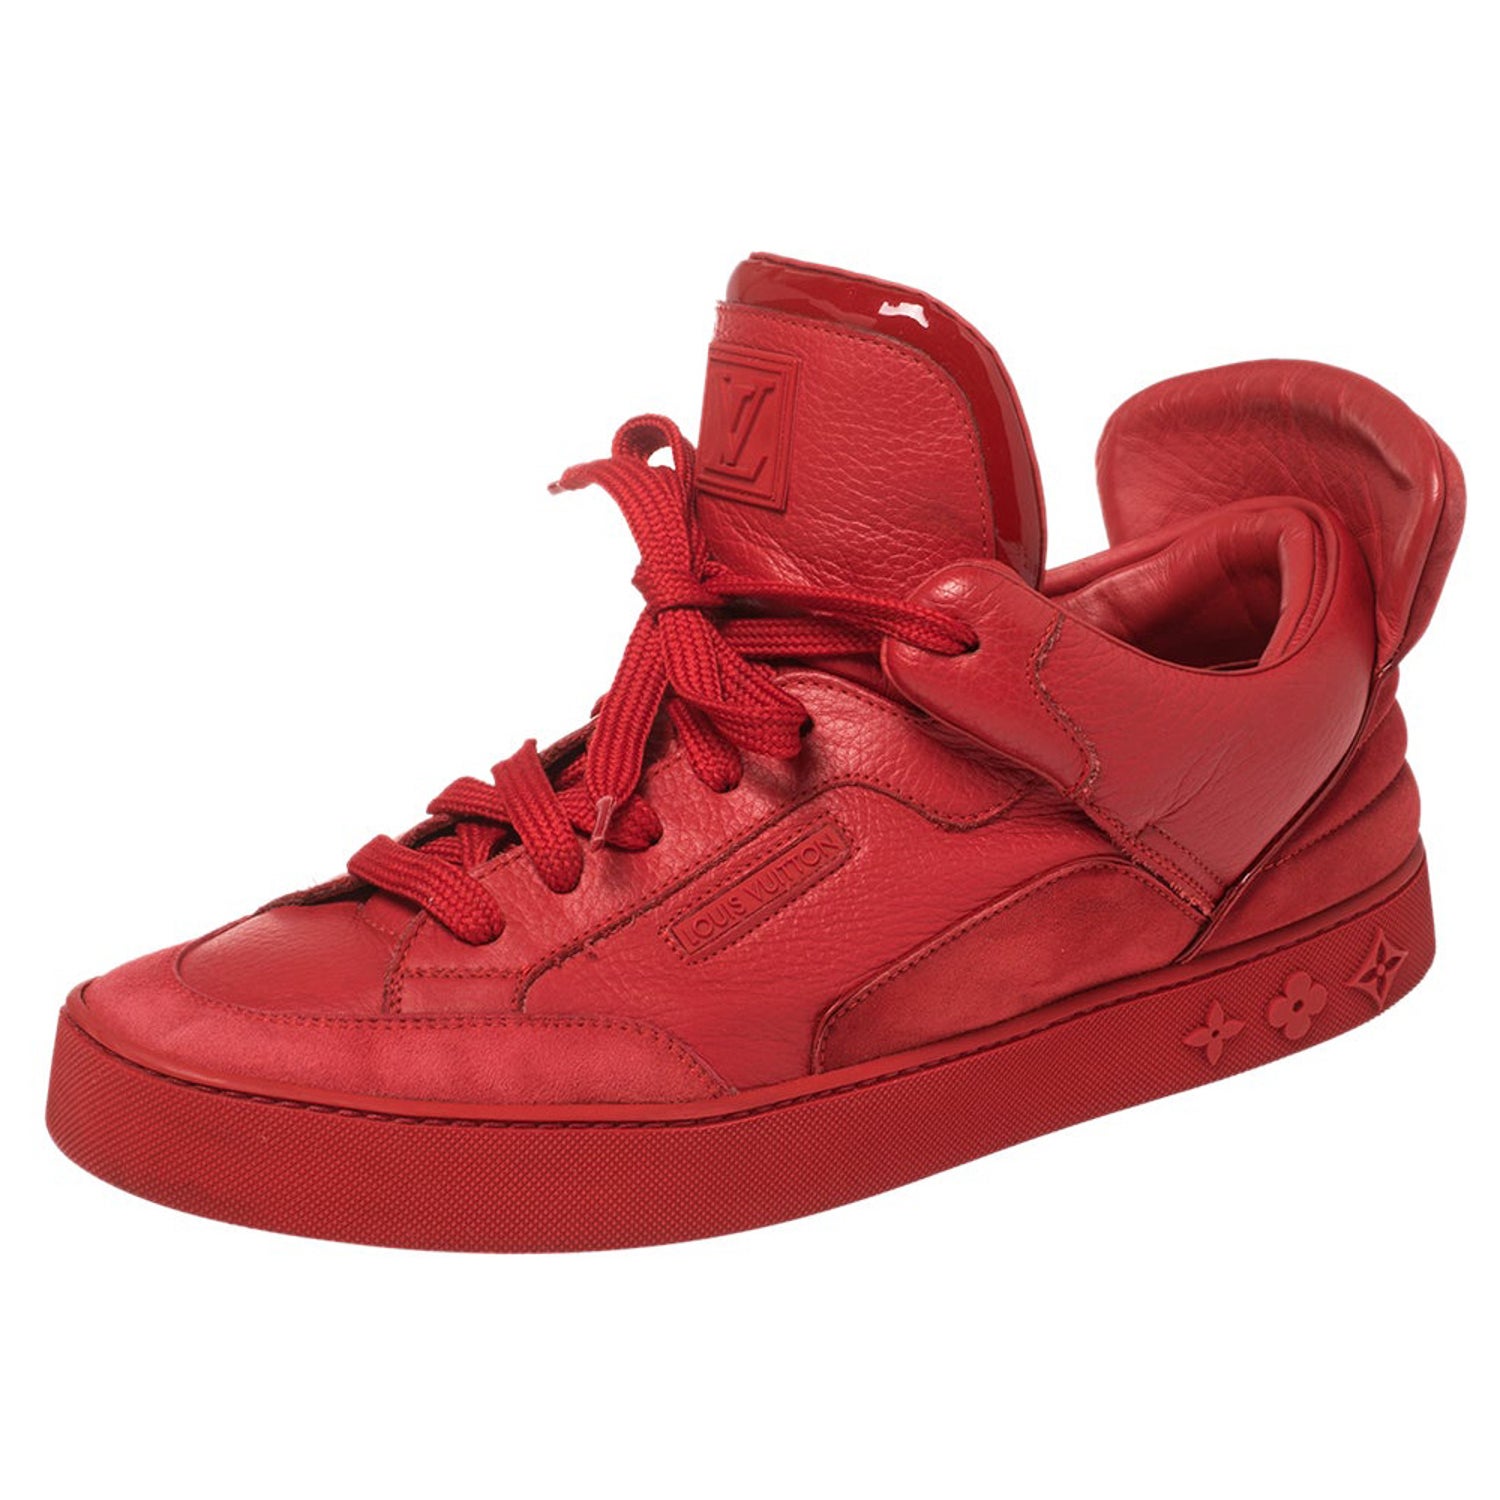 Louis Vuitton x Kanye West Jasper Sneakers . Believed to be the Most  valuable sneakers in the World size 7 - 7.5 available